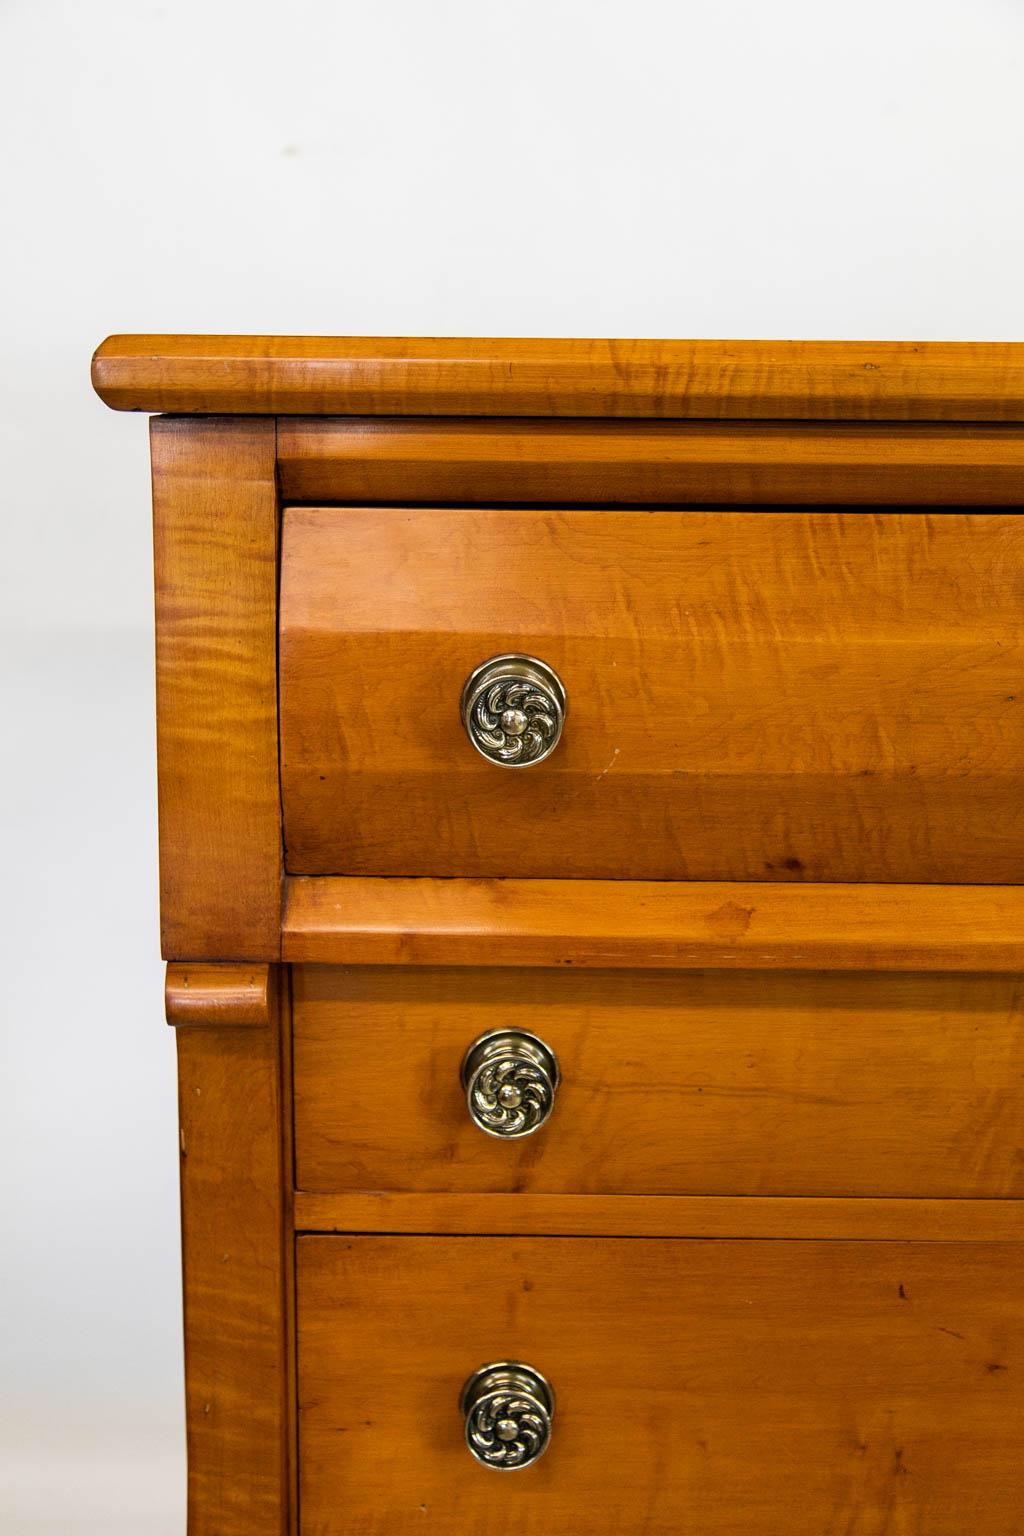 The locks on this chest are original. The brass hardware is later. The front styles have a scrolled shape and terminate in turned legs. The top drawer has a tri-faceted shape as does the top molding.